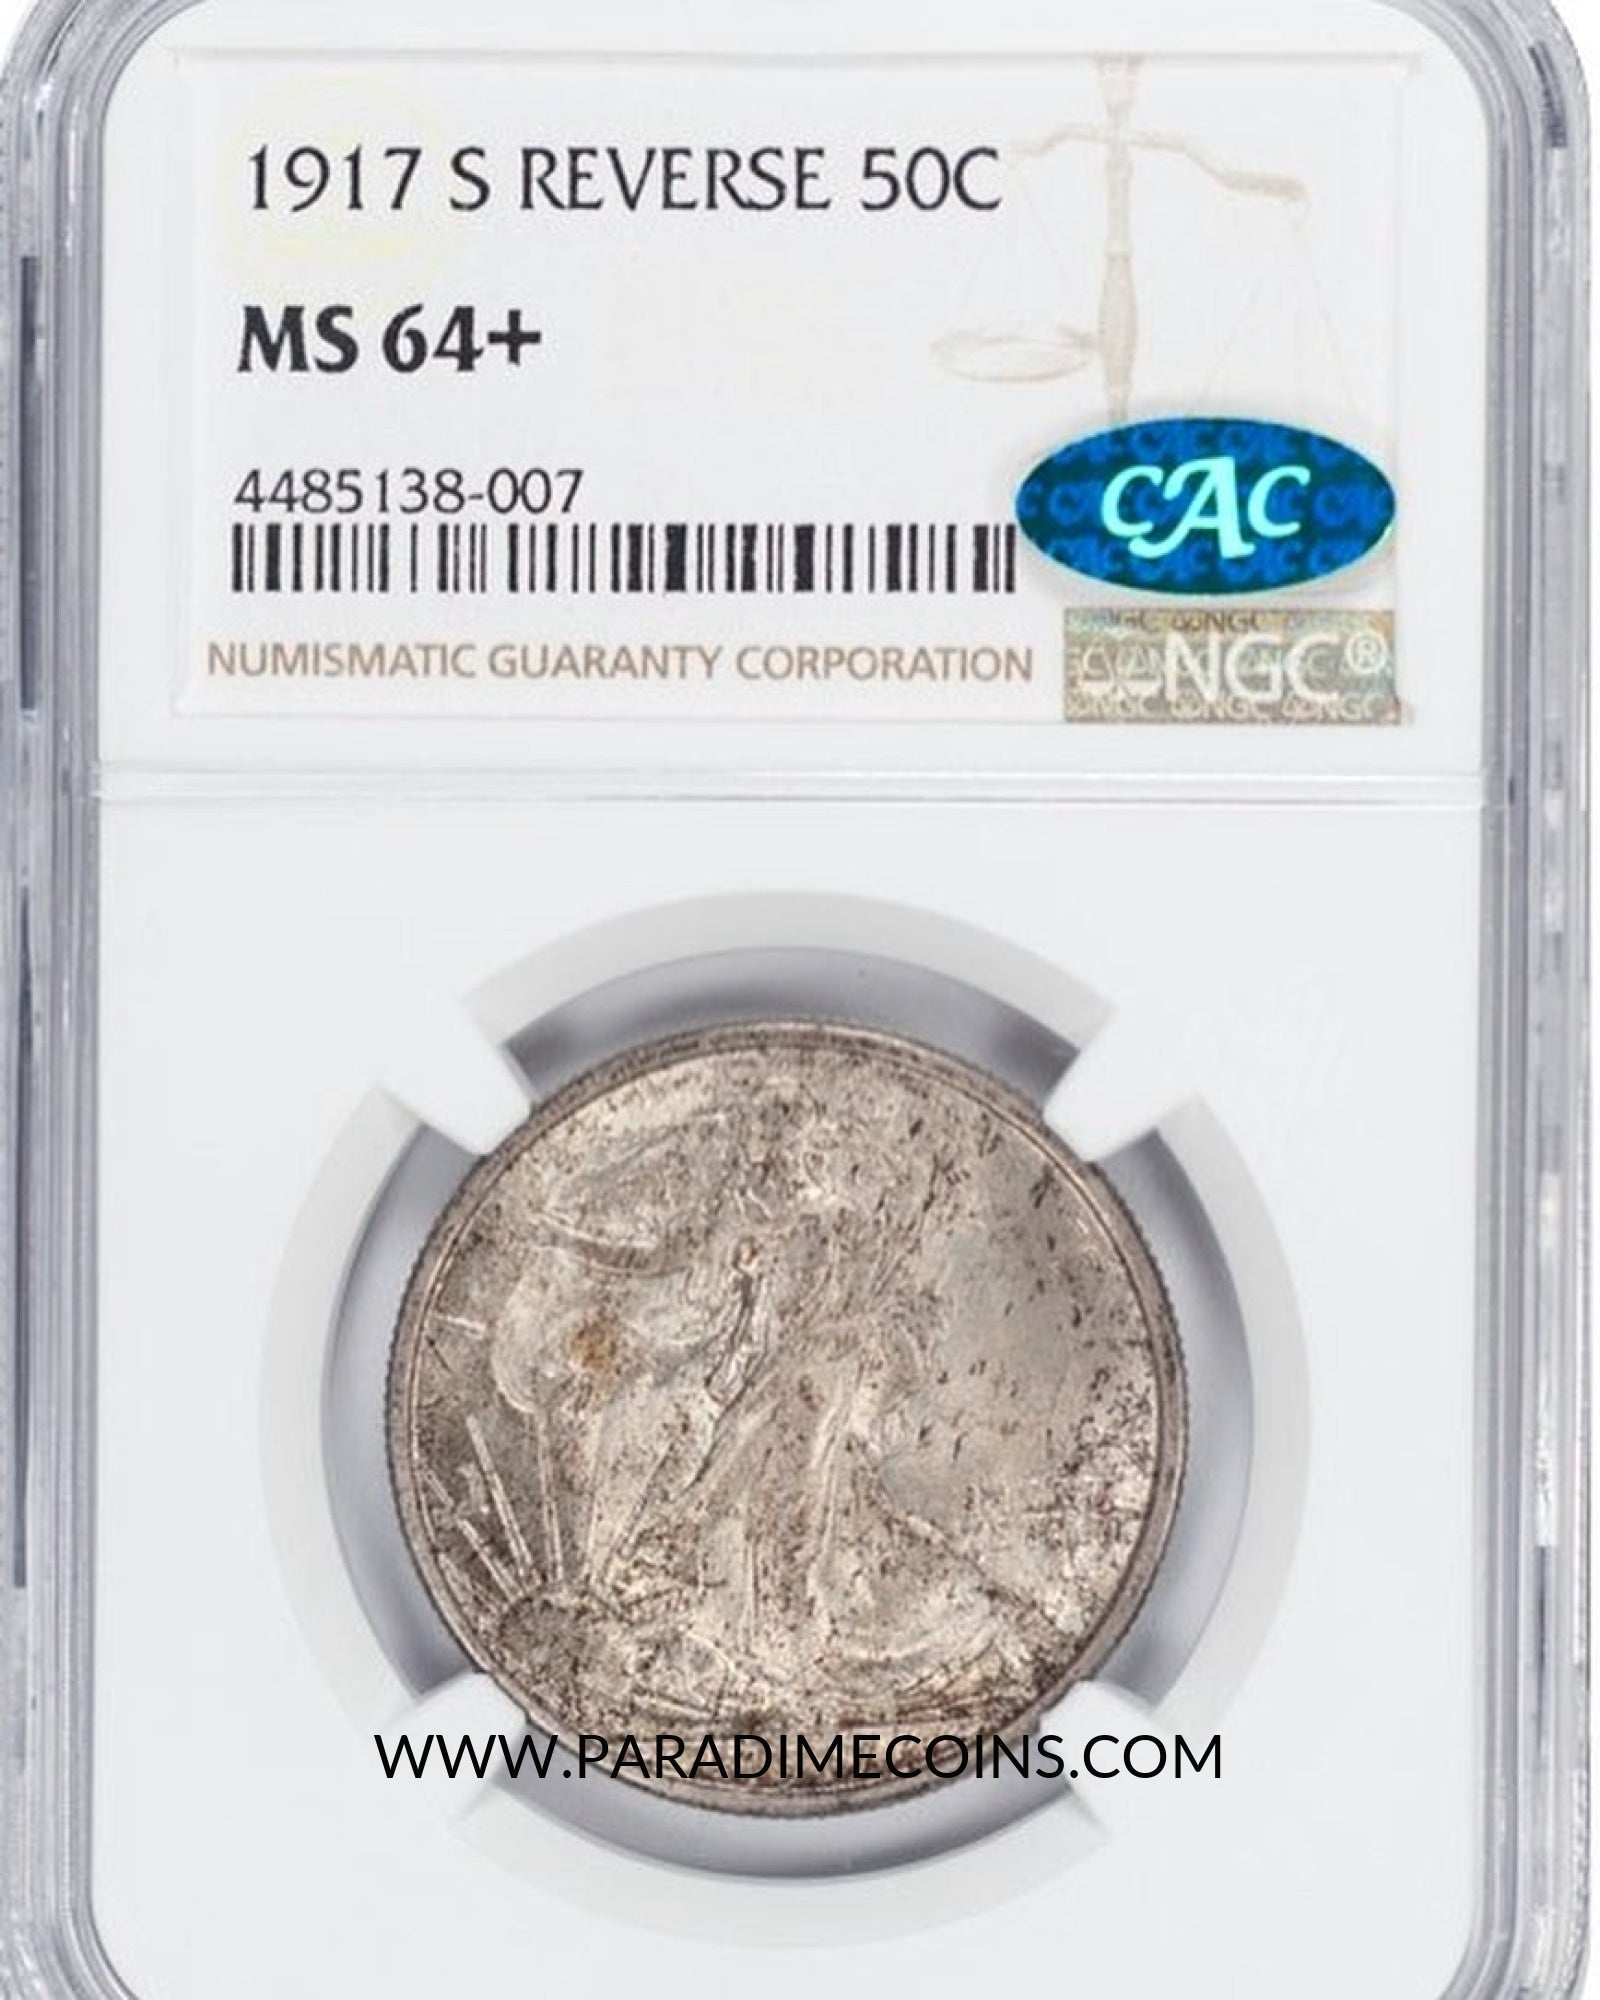 1917-S REVERSE 50C MS64+ NGC CAC - Paradime Coins | PCGS NGC CACG CAC Rare US Numismatic Coins For Sale